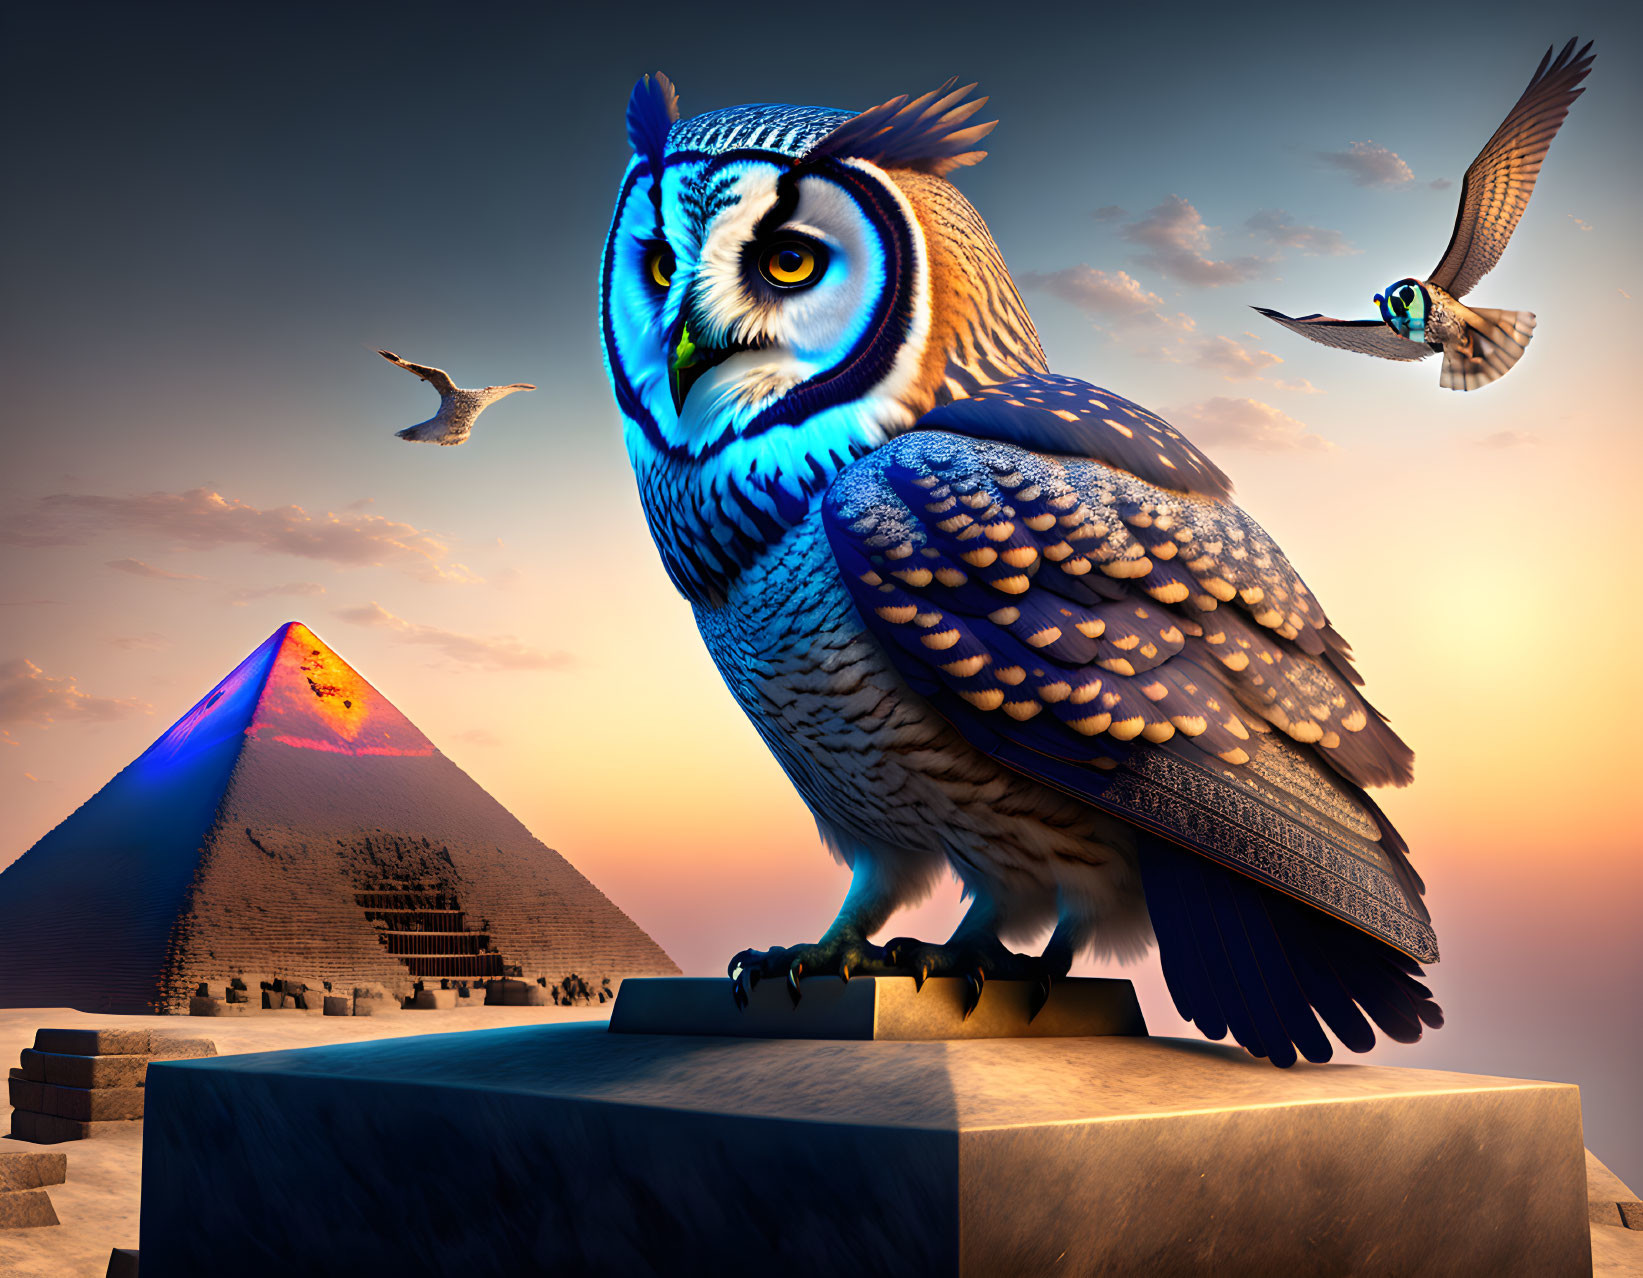 Stylized owl on pedestal with Great Pyramid and twilight sky.